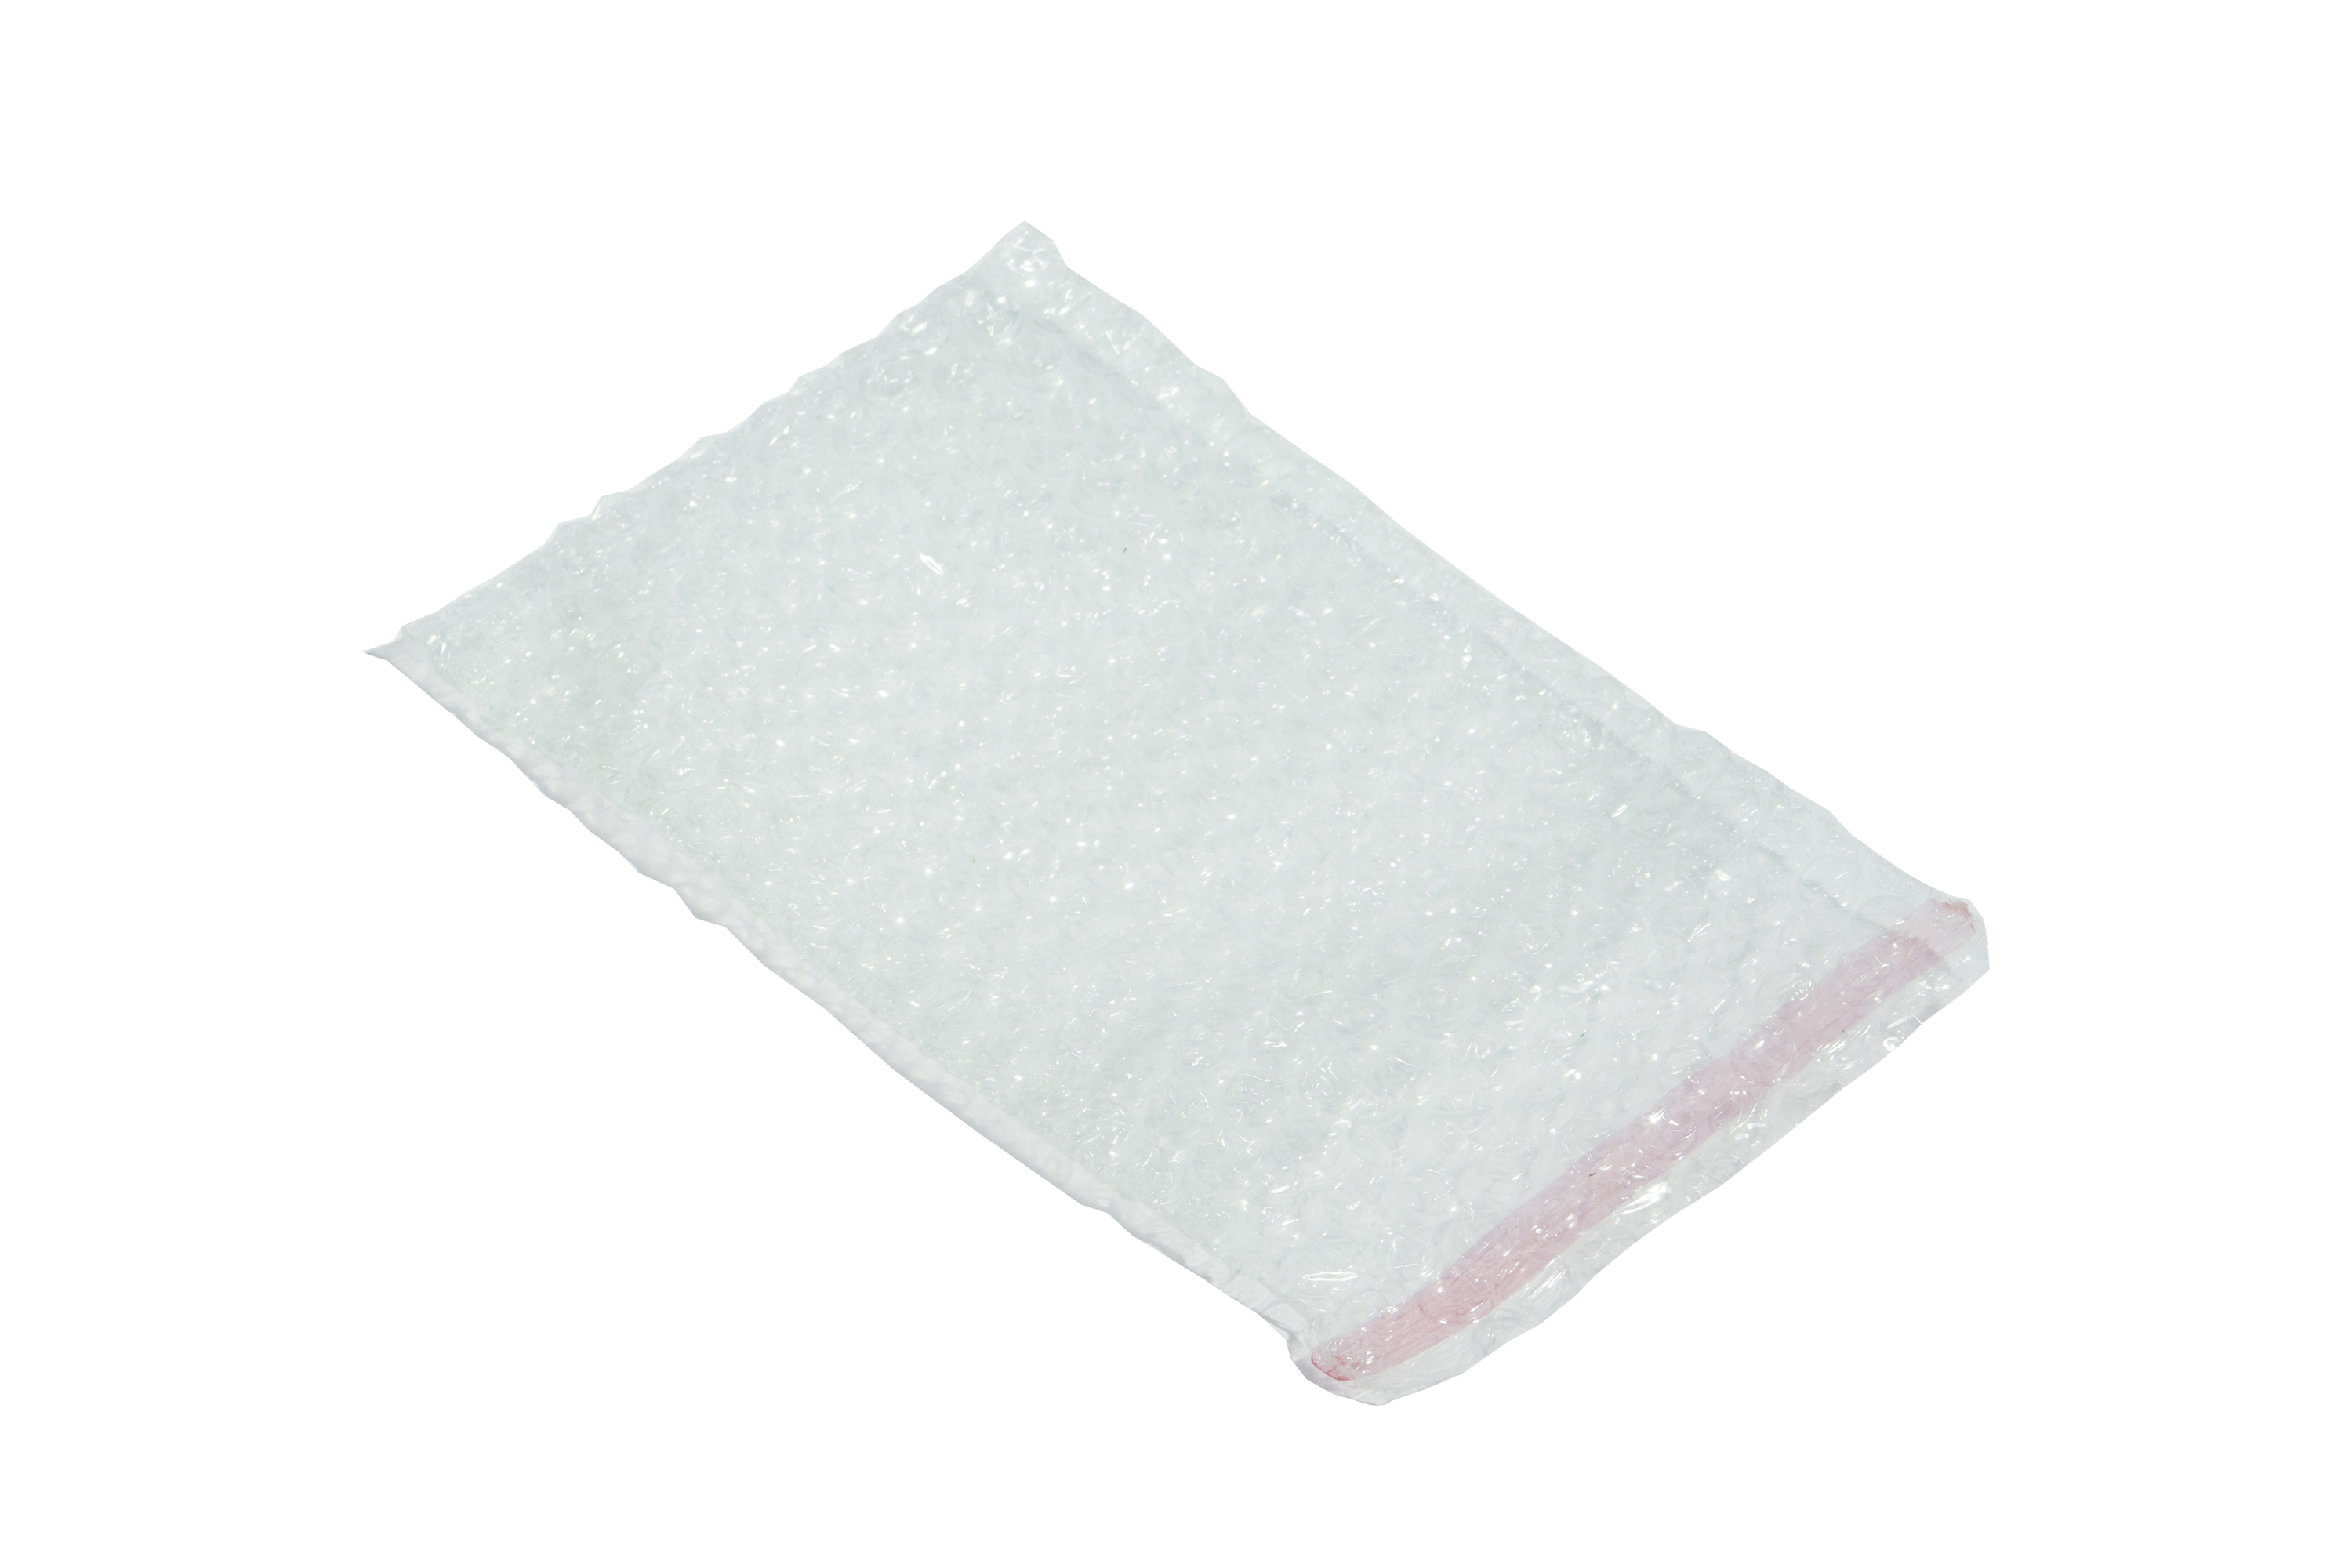 ABC 25 Pack Thermal Bubble Mailers 6.5 x 10.5 Thermal Padded envelopes.  Cushion Food mailers. Peel and Seal. Thermal Shipping Bags for mailing,  Packing. Medium Size. Wholesale Price.: Bubble Wrap: Amazon.com.au